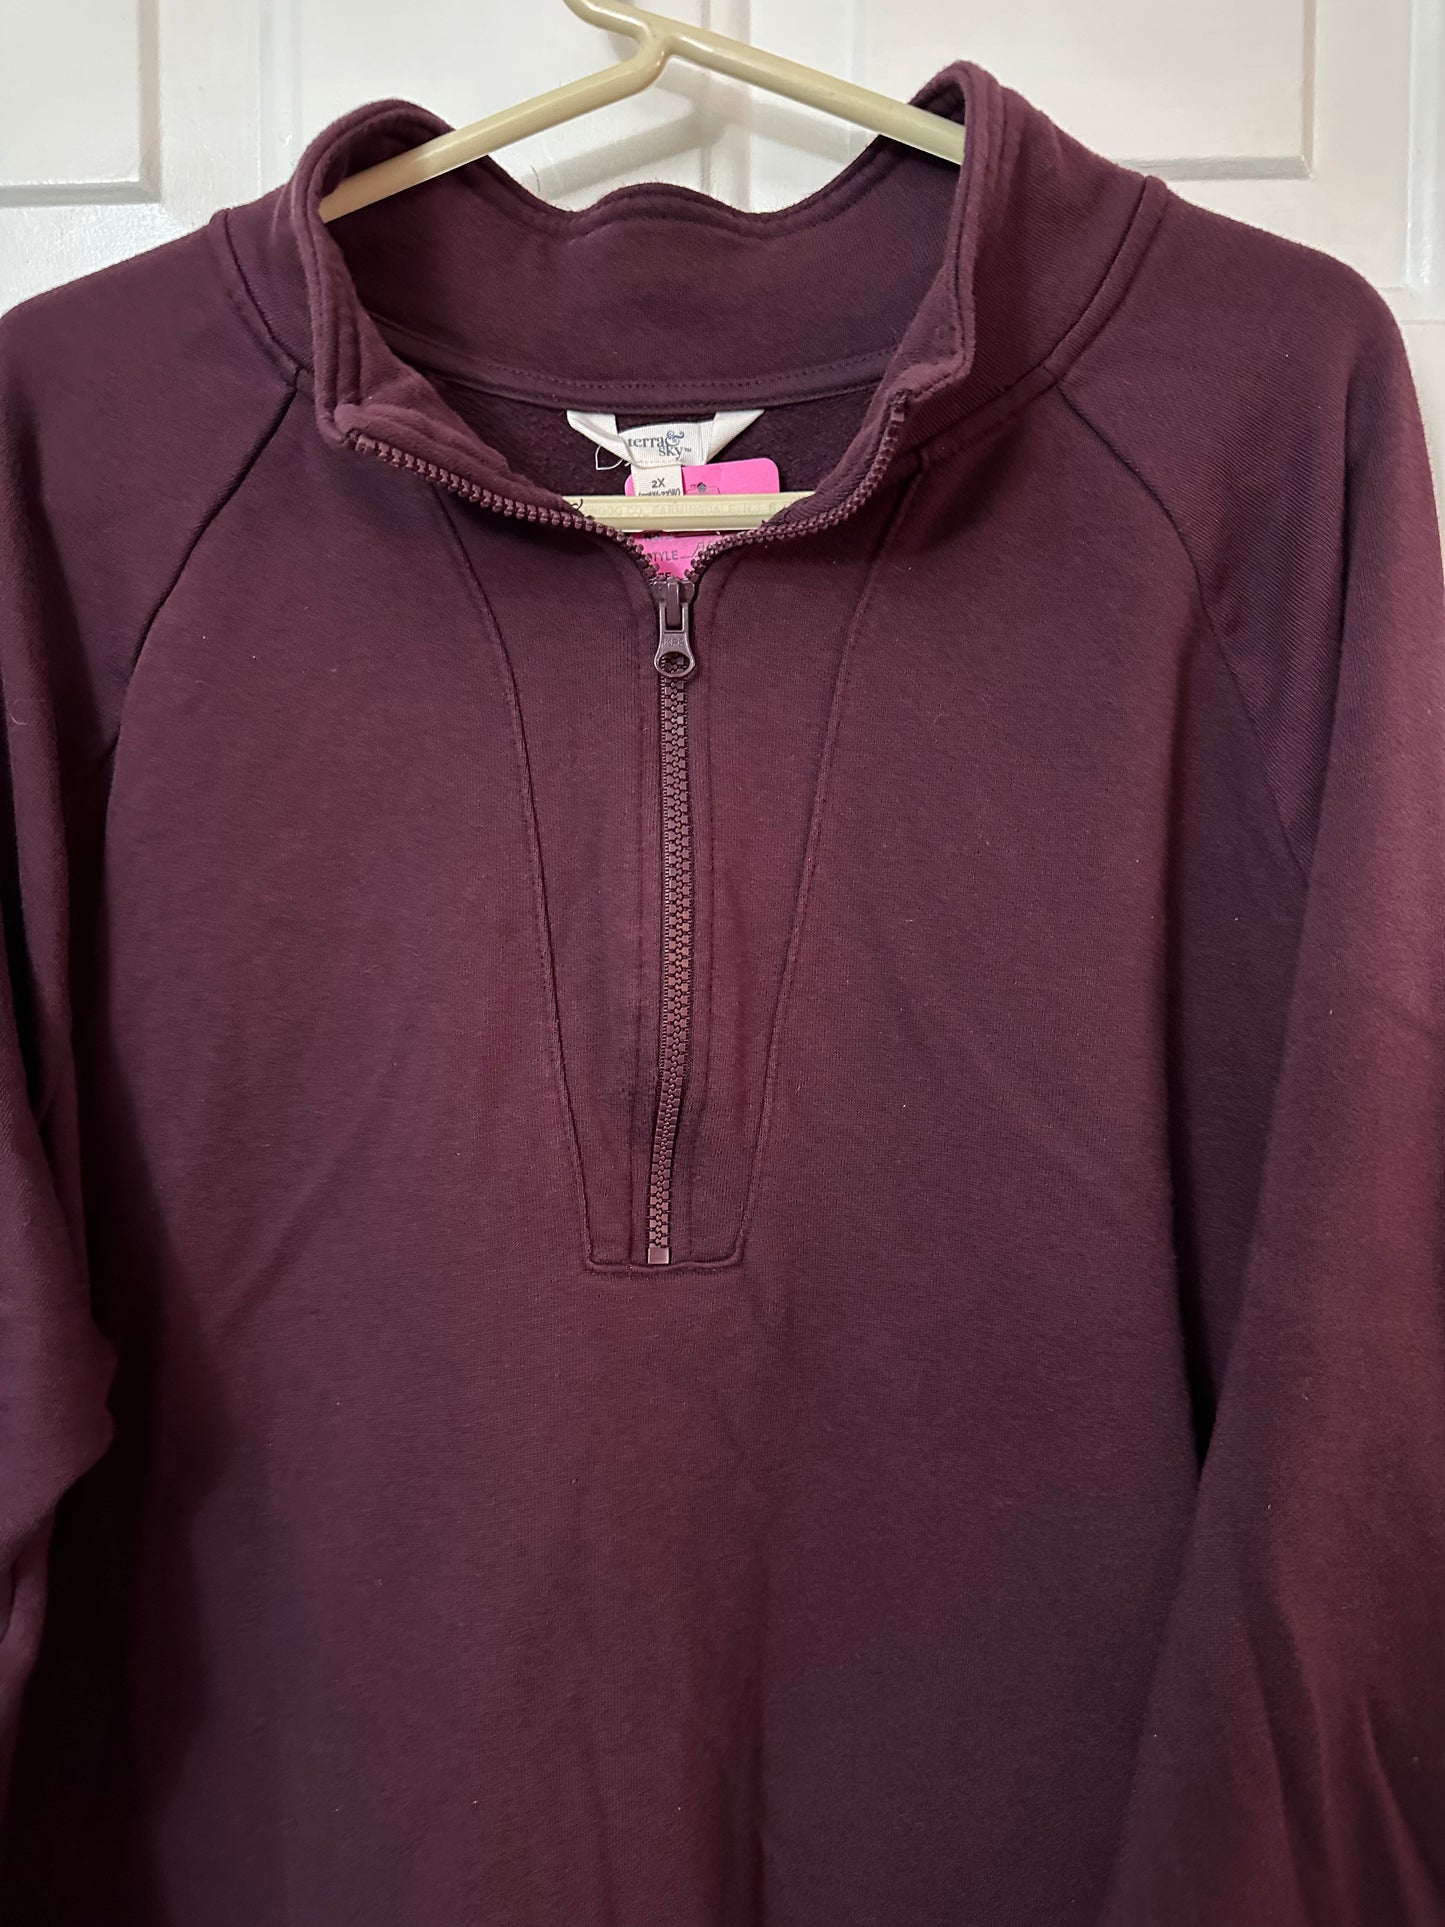 Terra & Sky plus size 2x. Purple 1/4 zip pullover. Preowned in good condition.